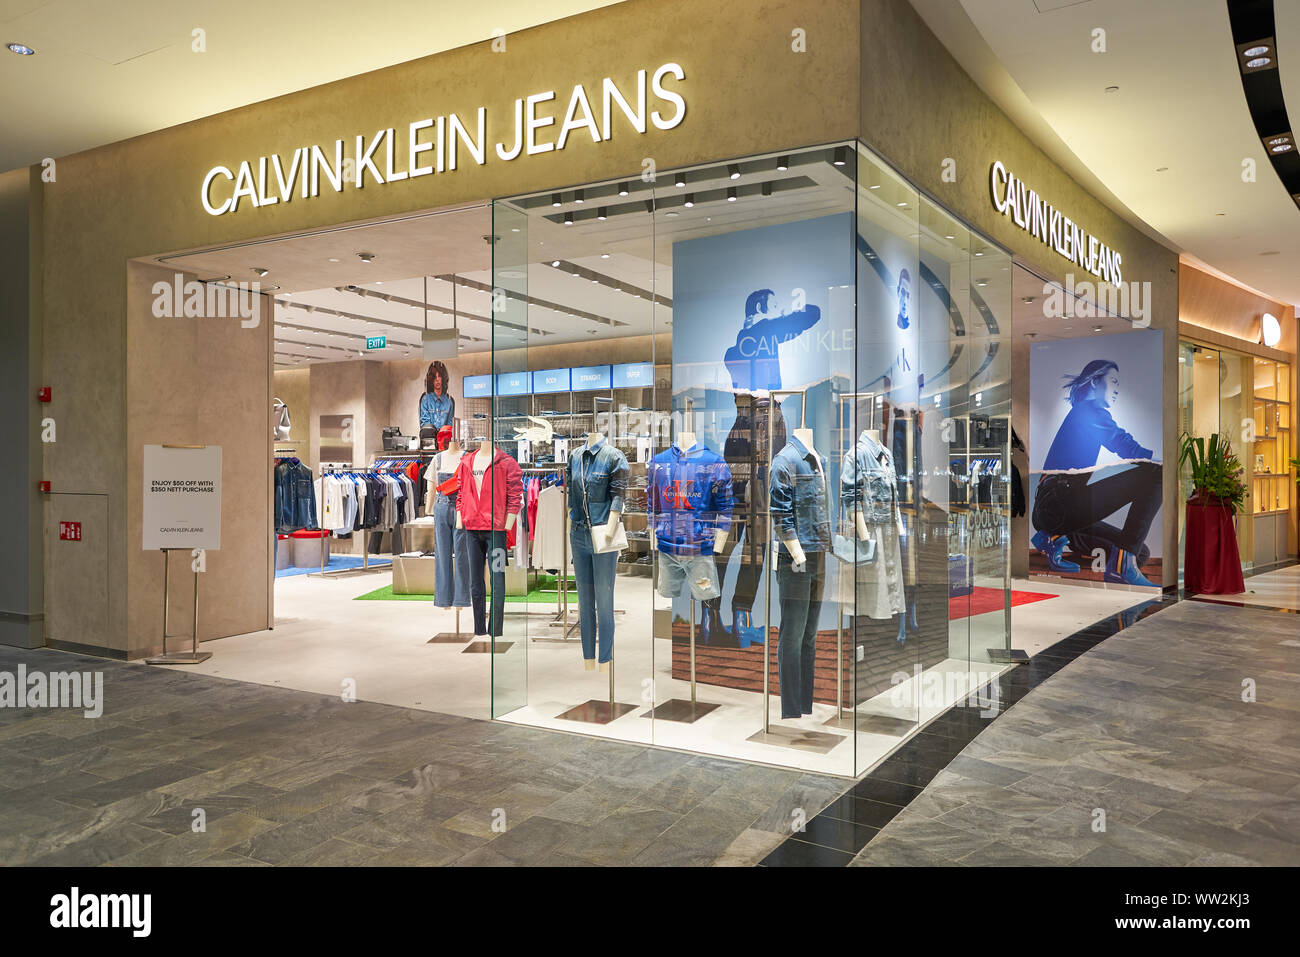 Calvin Klein Jeans High Resolution Stock Photography and Images - Alamy